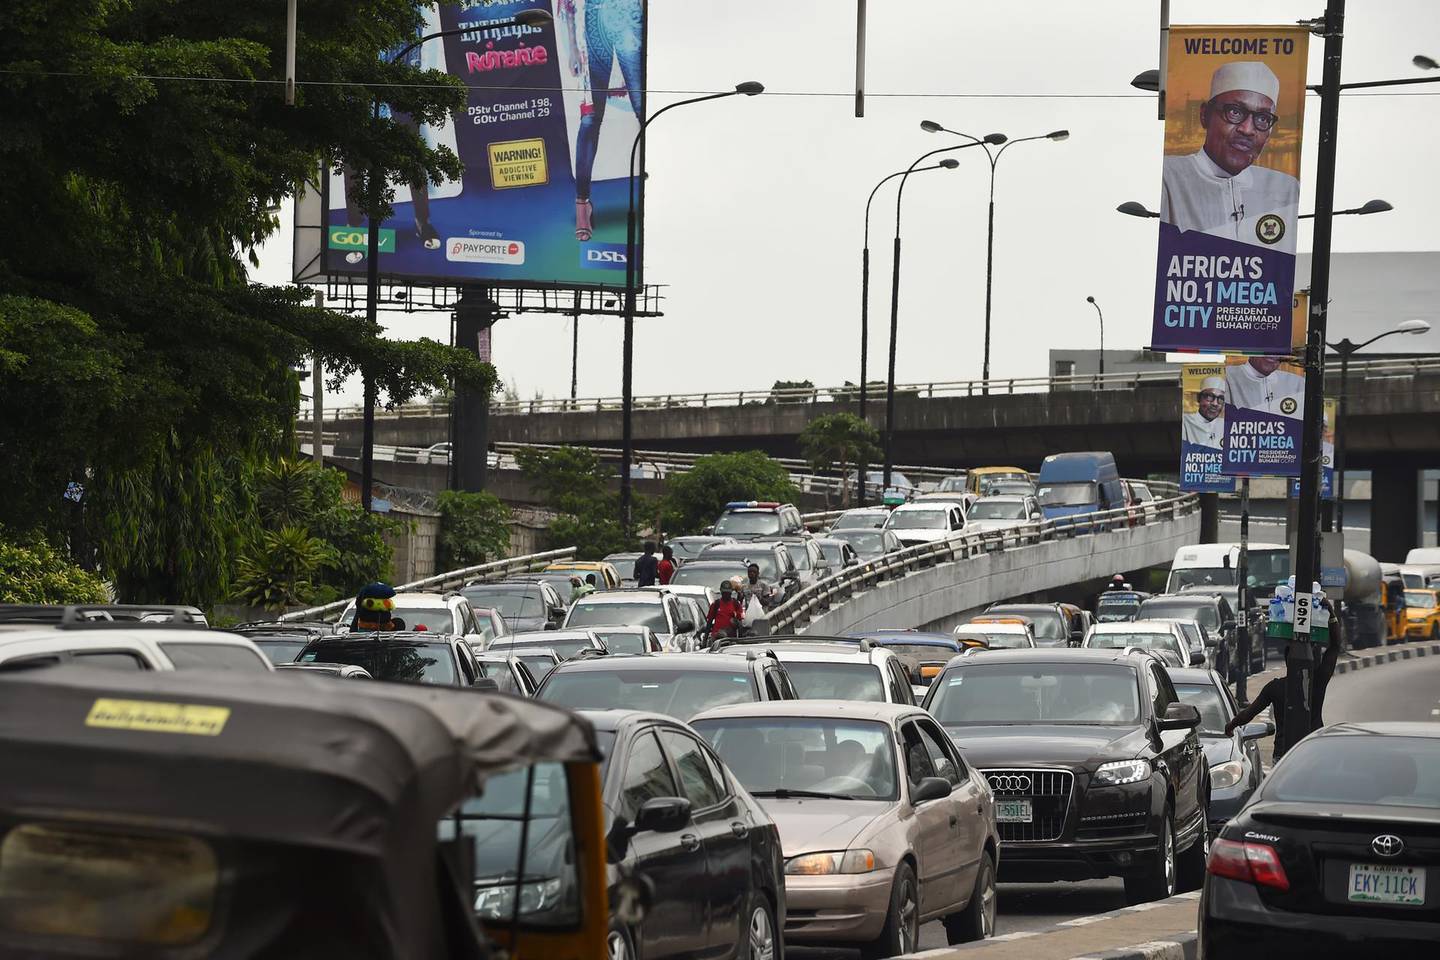 Motorists wait in a traffic jam under banners bearing a portrait of Nigeria's President Muhammadu Buhari, who is on official visit to Lagos, on March 29, 2018. - Nigeria's economic capital Lagos was on a lockdown on March 29, 2018, as Buhari makes his first official visit to the city of 22 million inhabitants since coming to power in 2015. (Photo by PIUS UTOMI EKPEI / AFP)